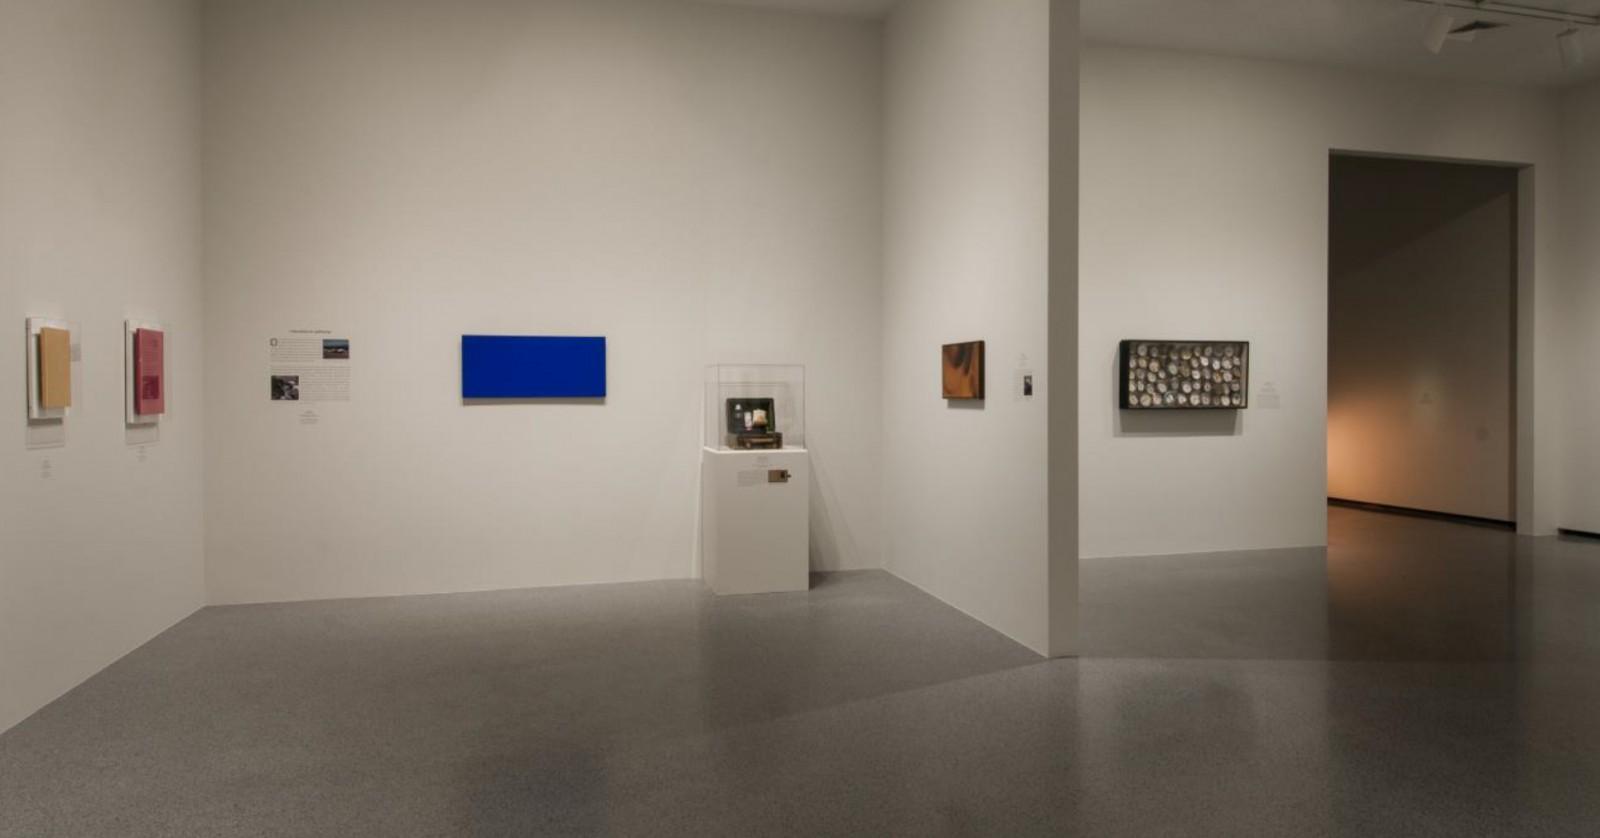 Vue de l'exposition "From Los Angeles to New York: The Dwan Gallery 1959-1971", National Gallery of Art, 2017 (IKB 186, MG 31, MP 21, F 113)